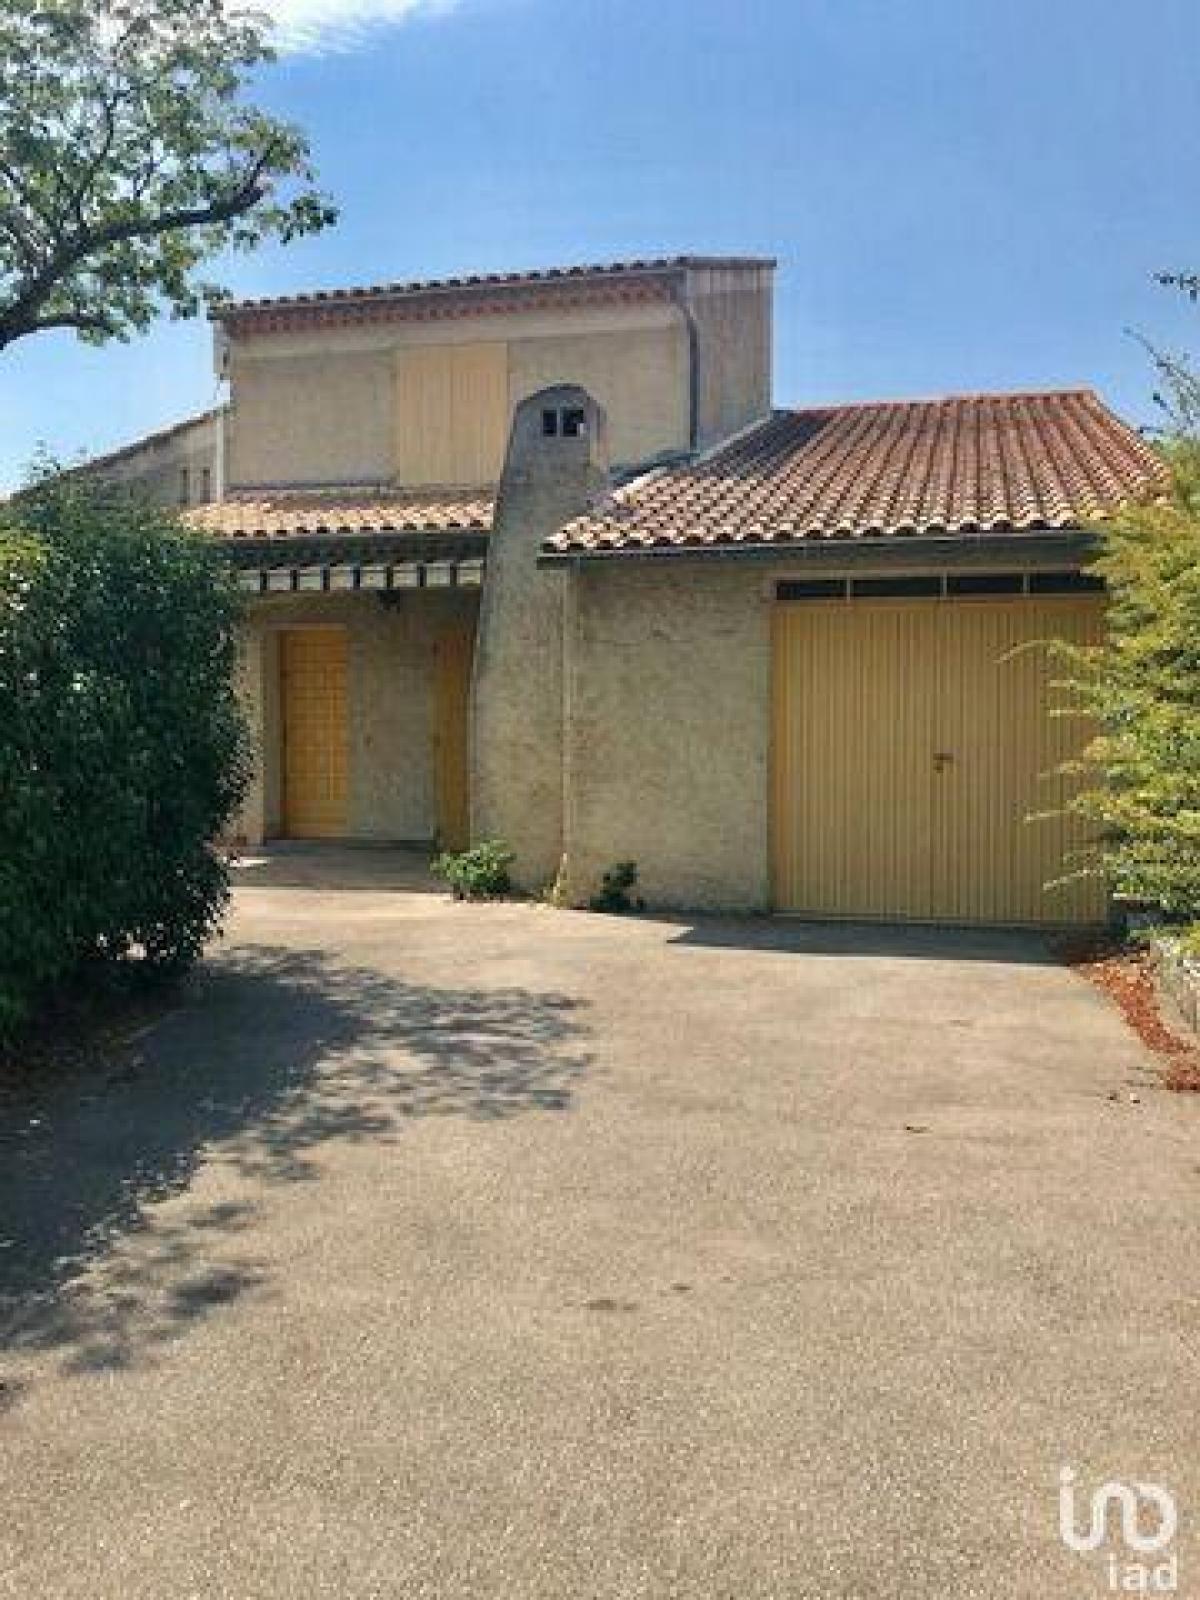 Picture of Home For Sale in Le Pontet, Provence-Alpes-Cote d'Azur, France